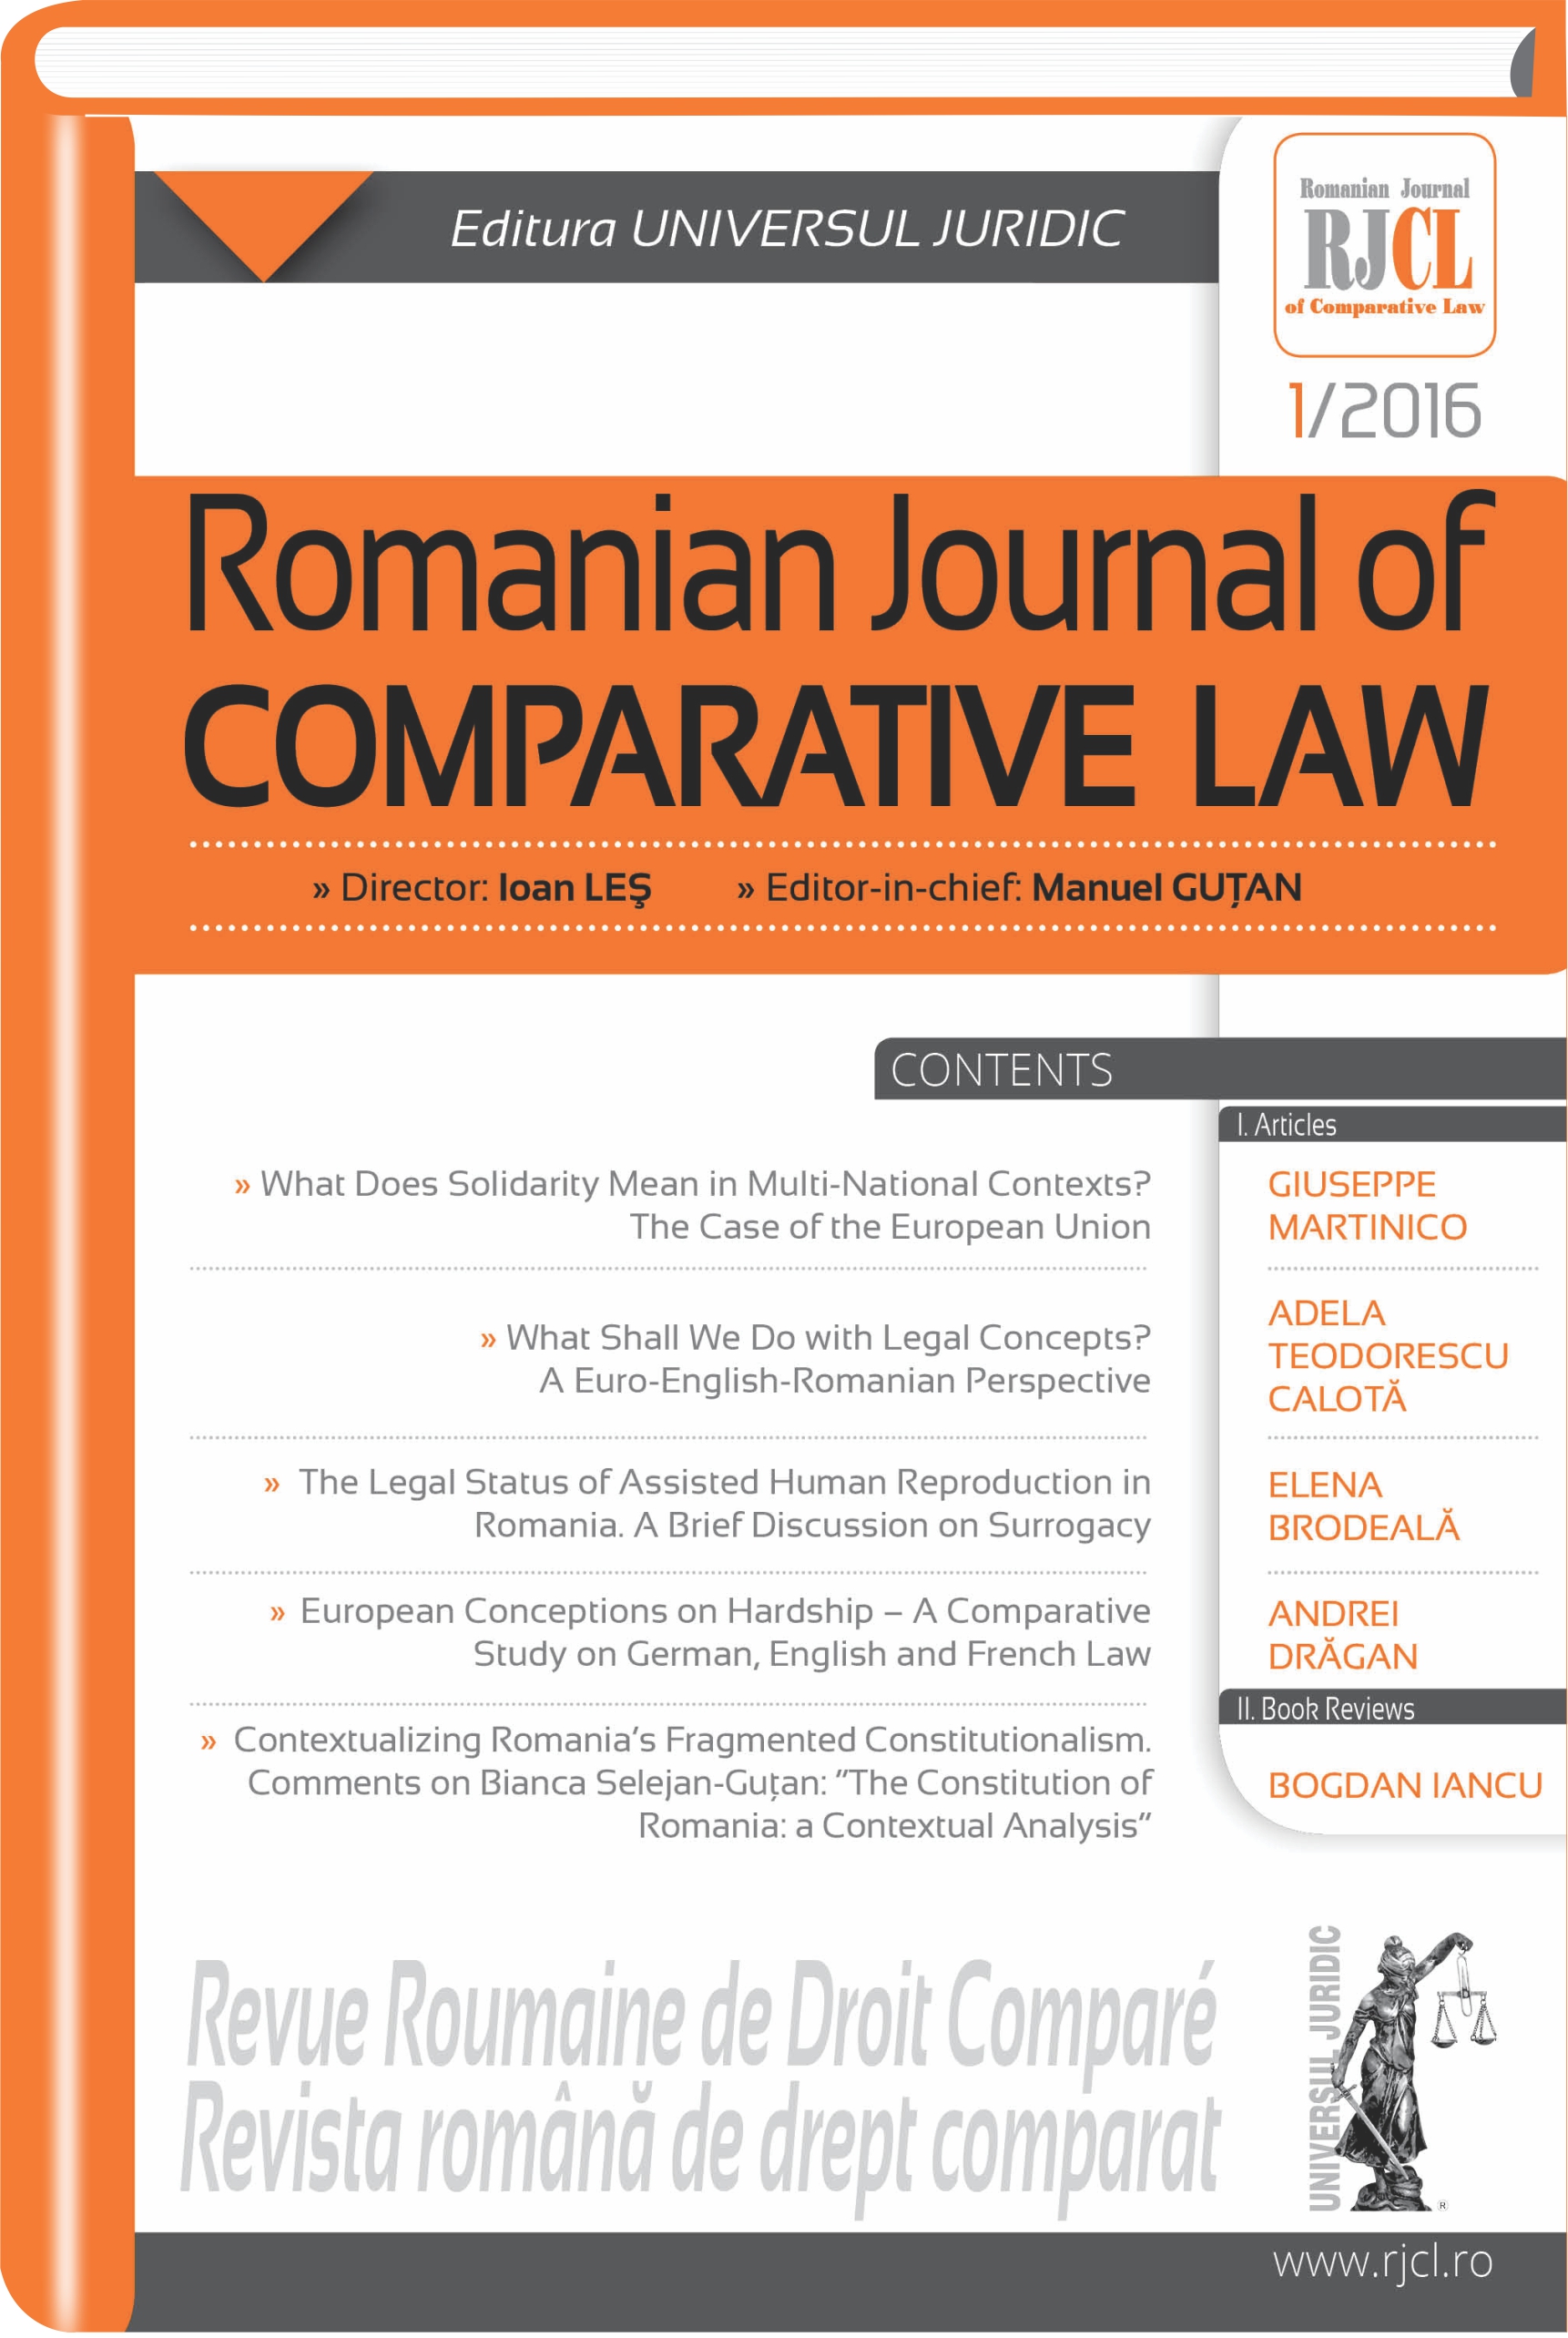 European Conceptions on Hardship – A Comparative Study on German, English and French Law Cover Image